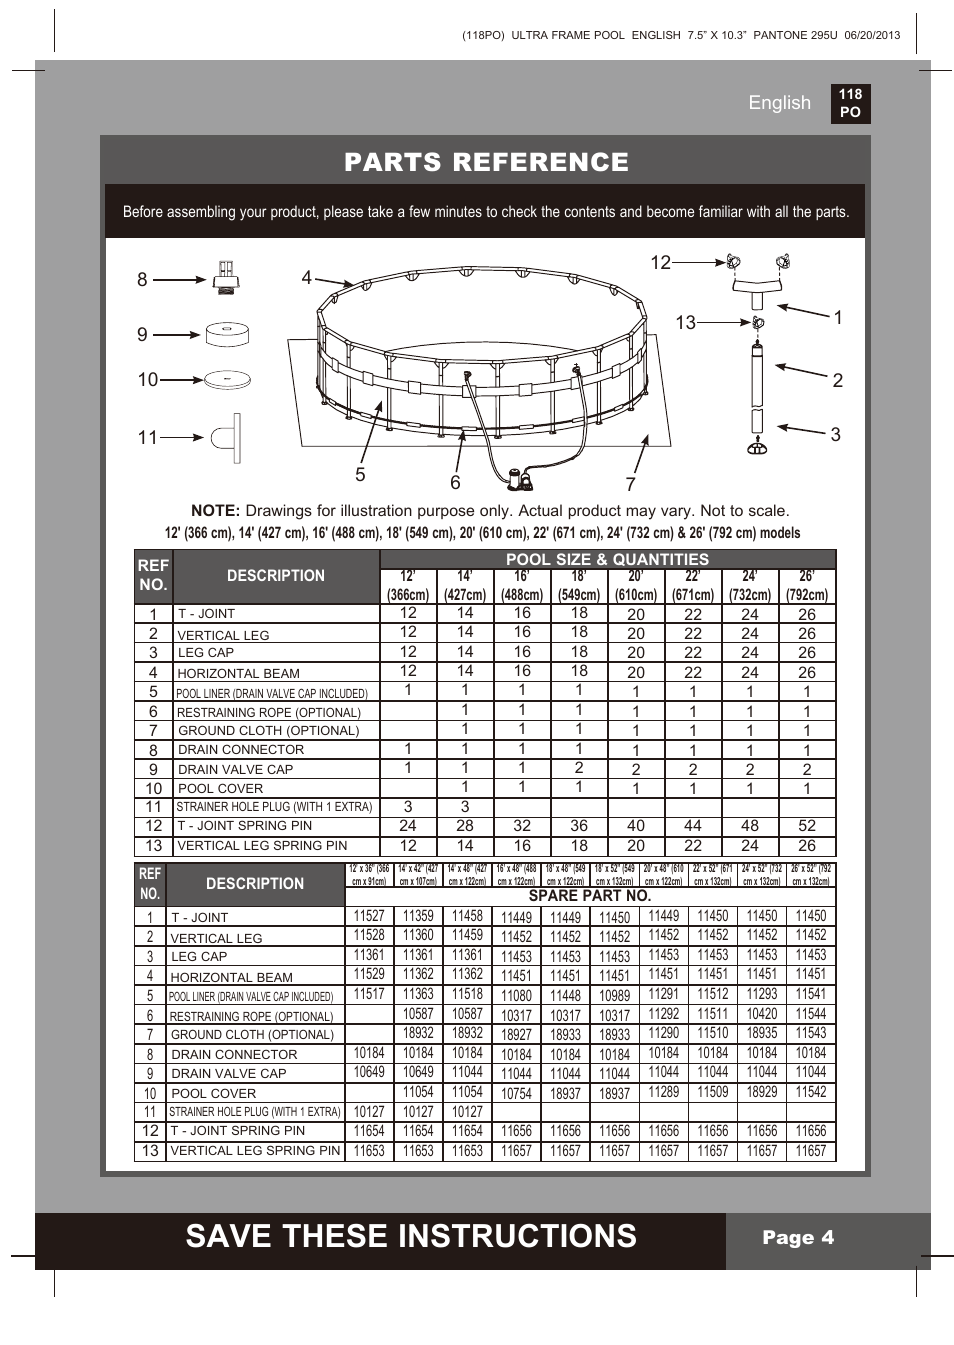 Save these instructions, Parts reference, English page 4 | Intex 18 FT X 52  IN ULTRA FRAME POOL 2014 User Manual | Page 4 / 12 | Original mode